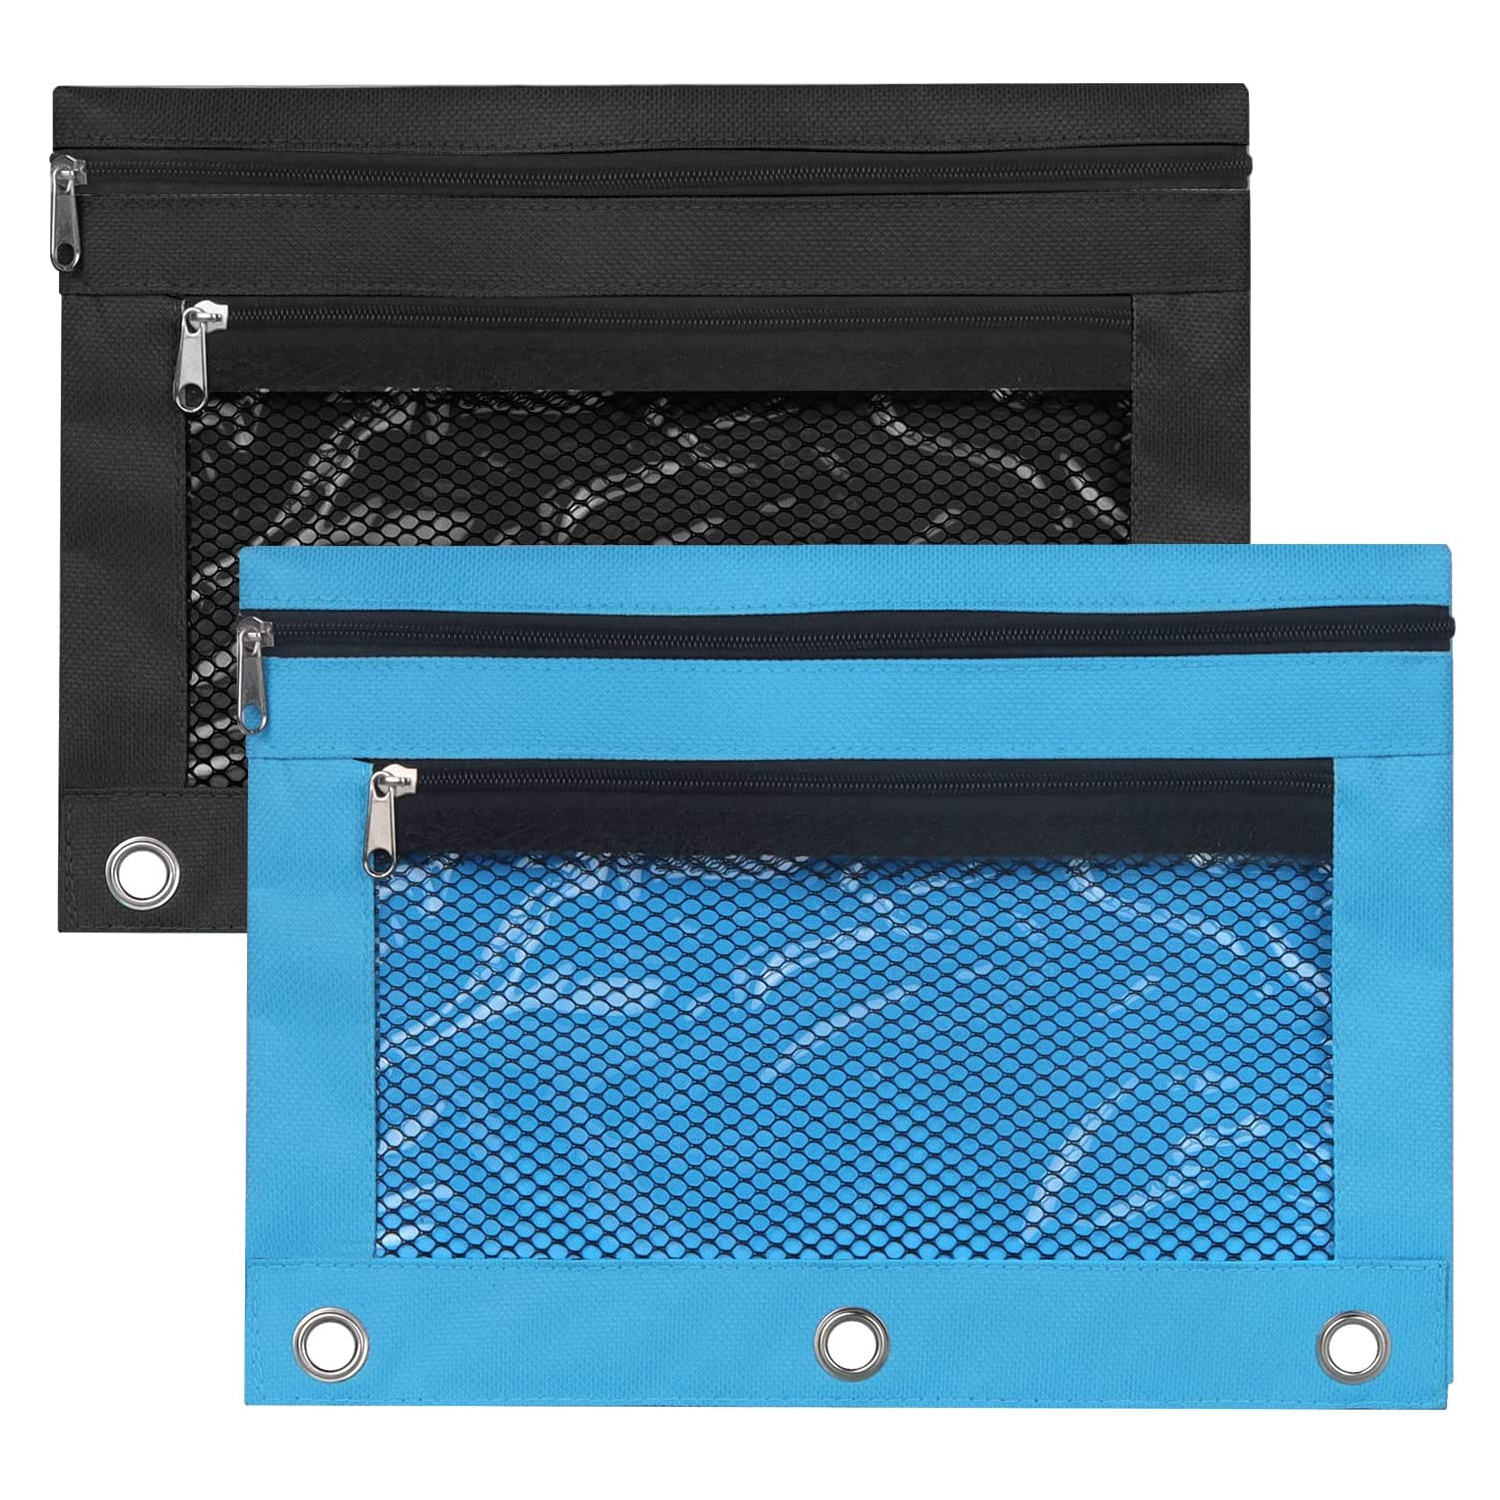  Pencil Pouch for 3 Ring Binder, 2 Pack Pencil Pouch 3 Ring  Fabric Pencil Pouches Black Pencil Bags,Clear Window Pencil Bags with  Zipper & Reinforced Grommets for Office Supplies : Office Products